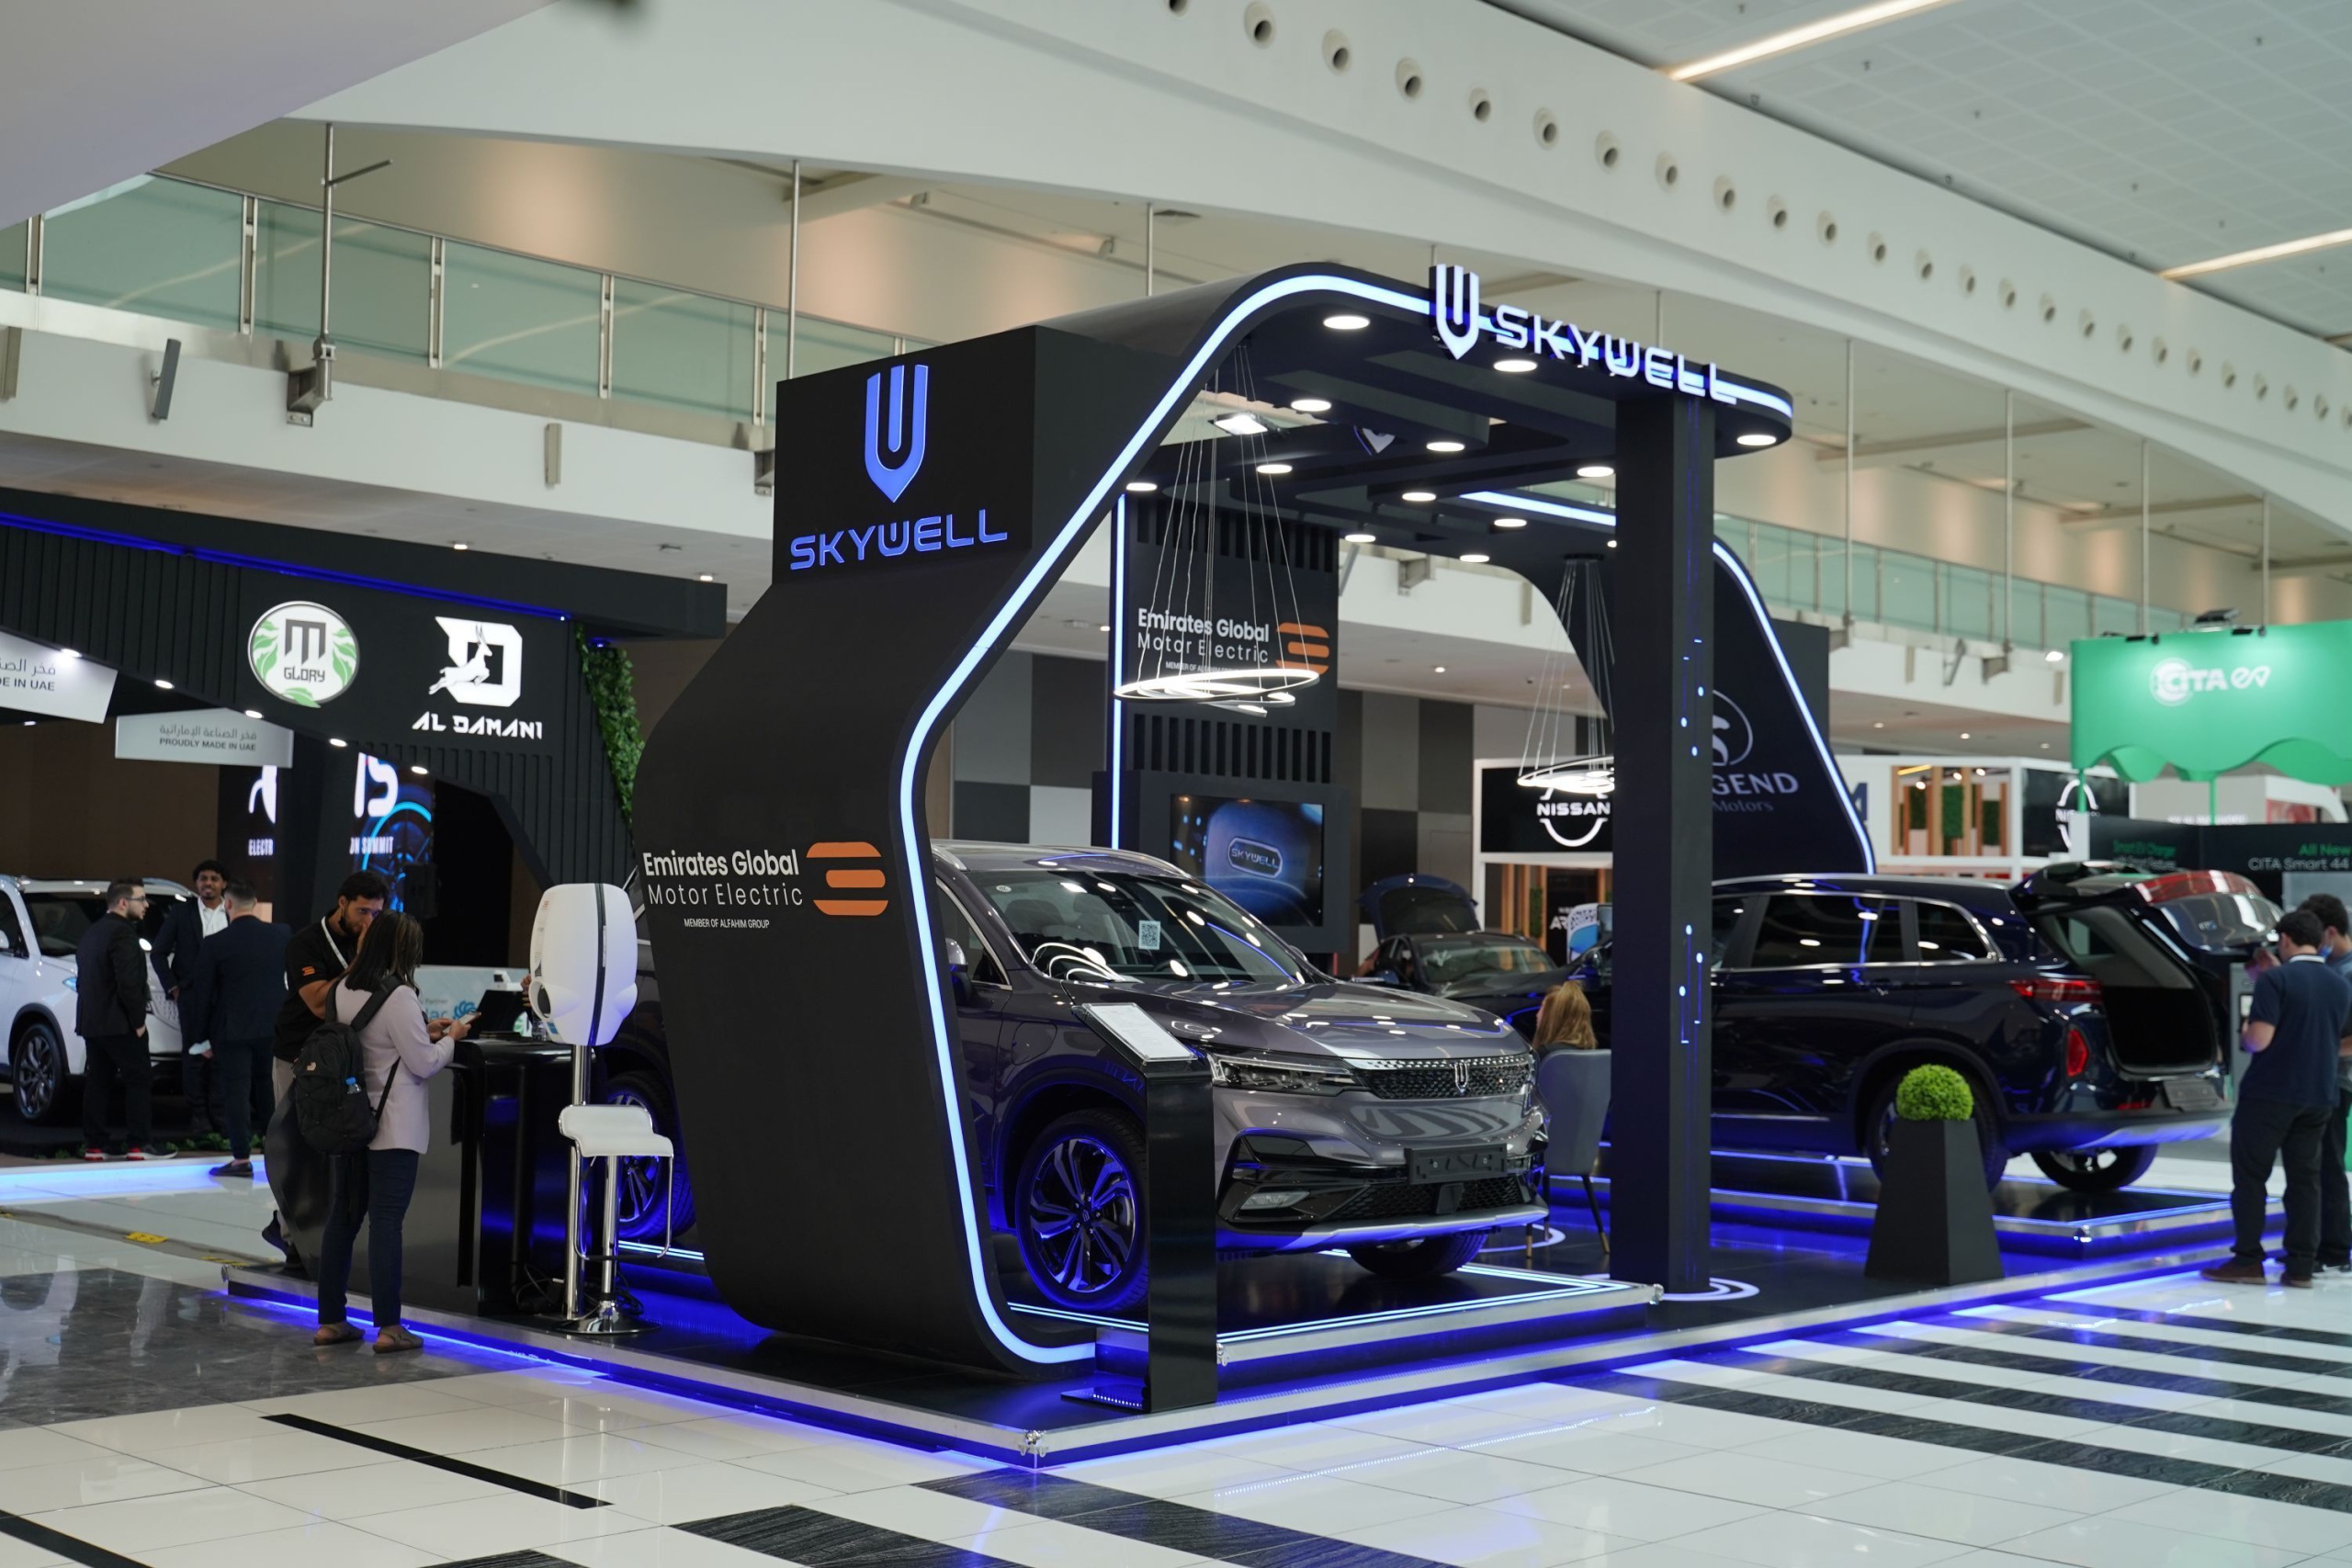 Abu Dhabi hosts the Electric Vehicles Conference and Exhibition, May 29